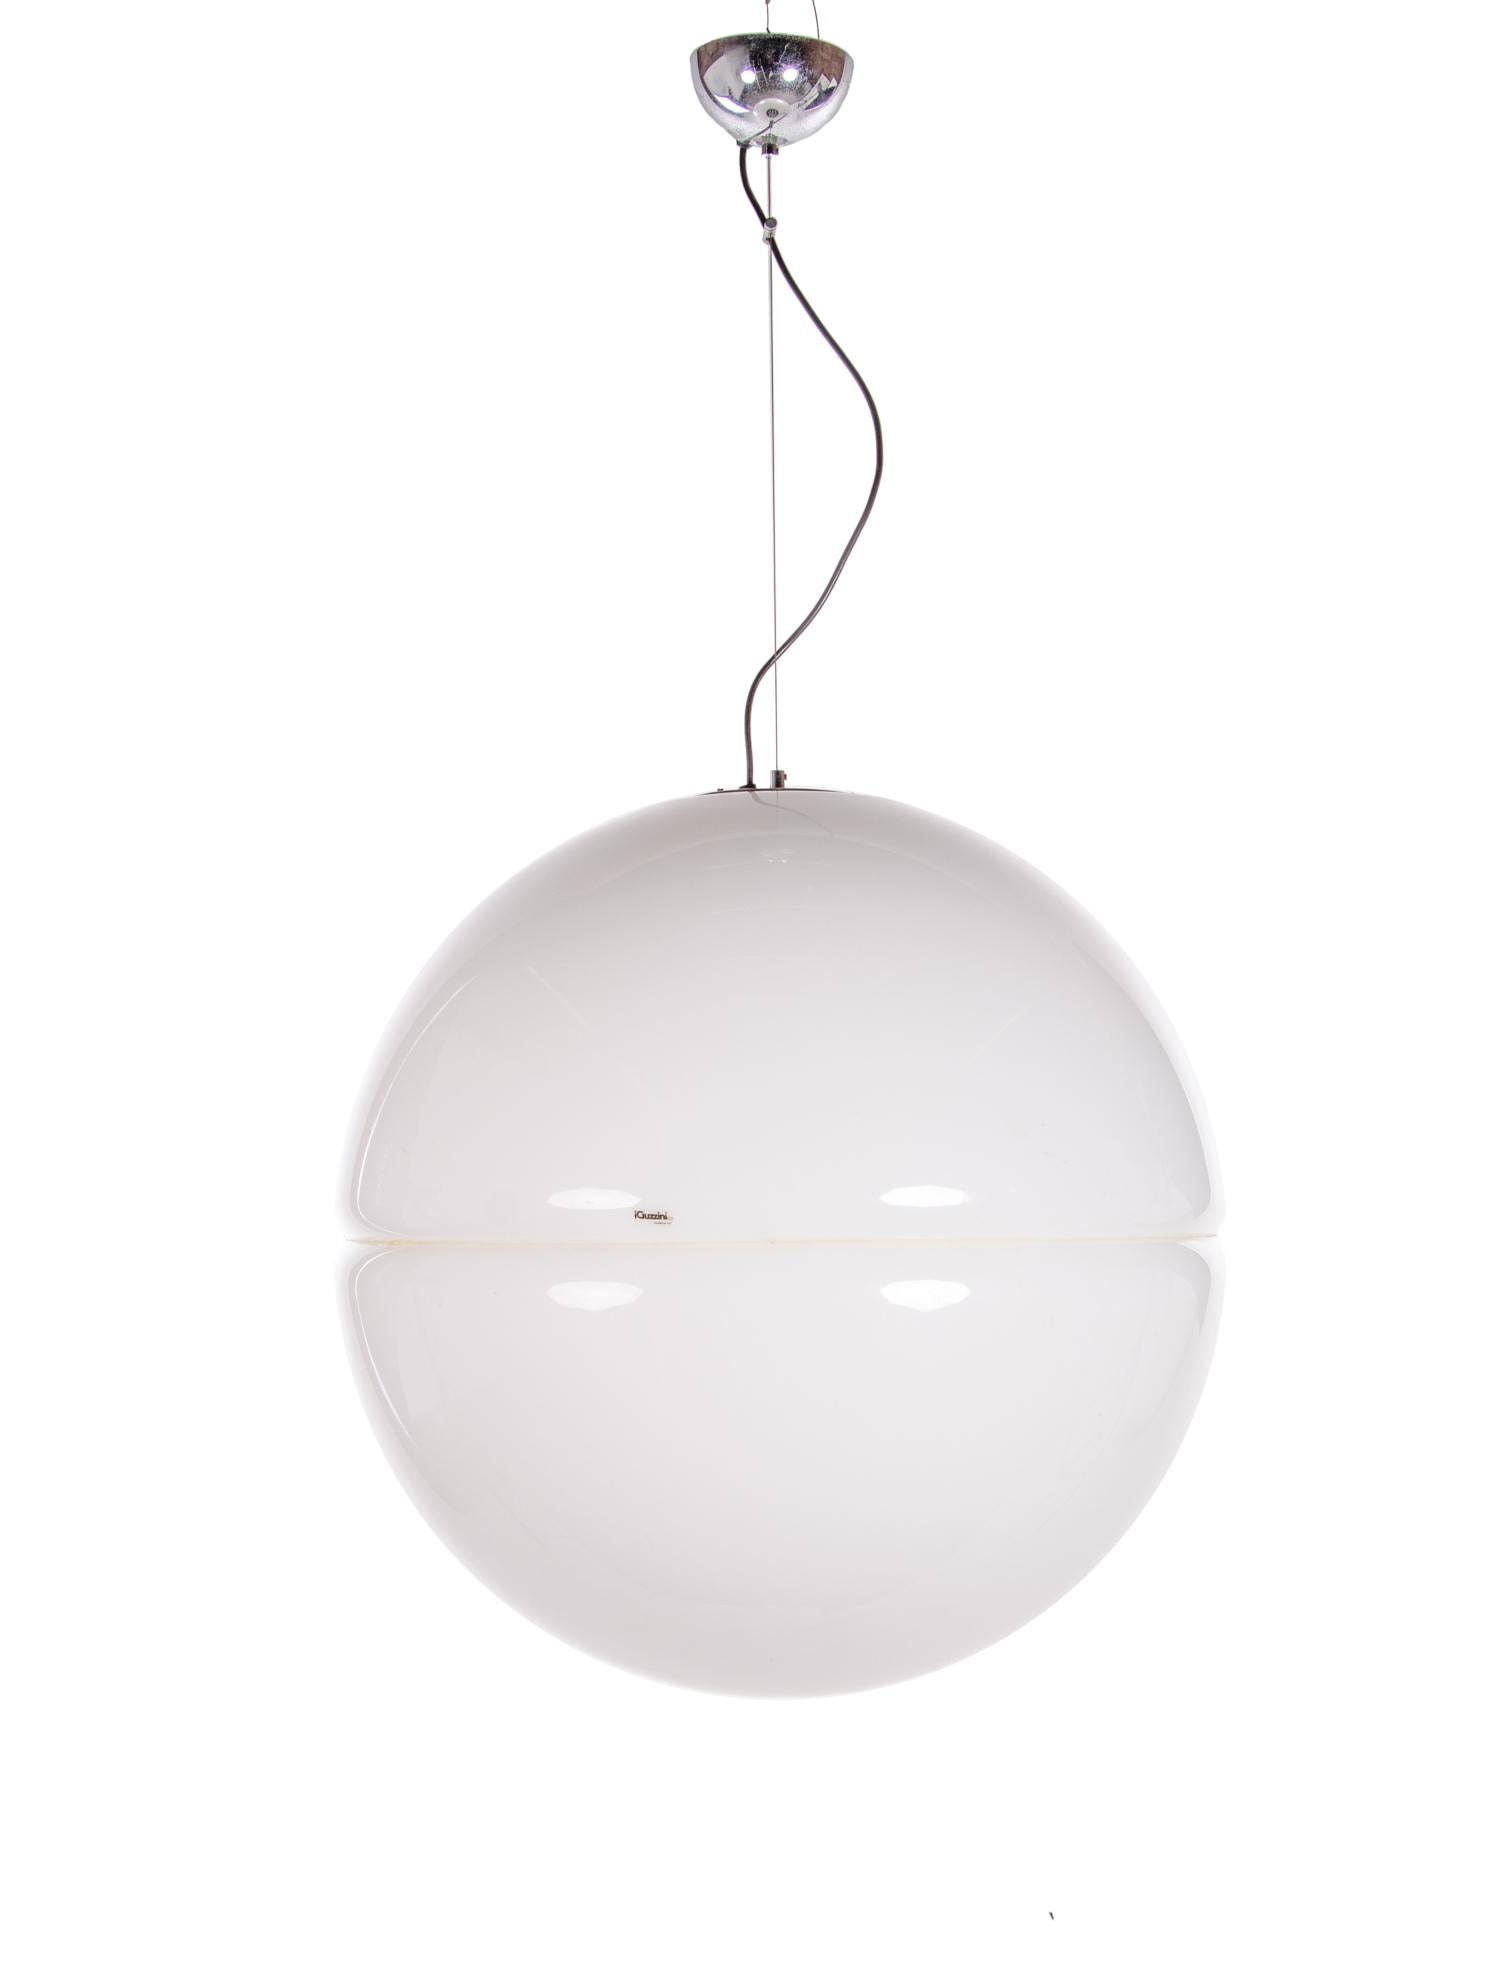 Huge space age pendant light 'Sfera' made of two shells. Designed in the 1970s by Harvey Guzzini and manufactured by iGuzzini, illuminazione S.p.A, in Italy. 
This is the large version with a diameter of 27.55